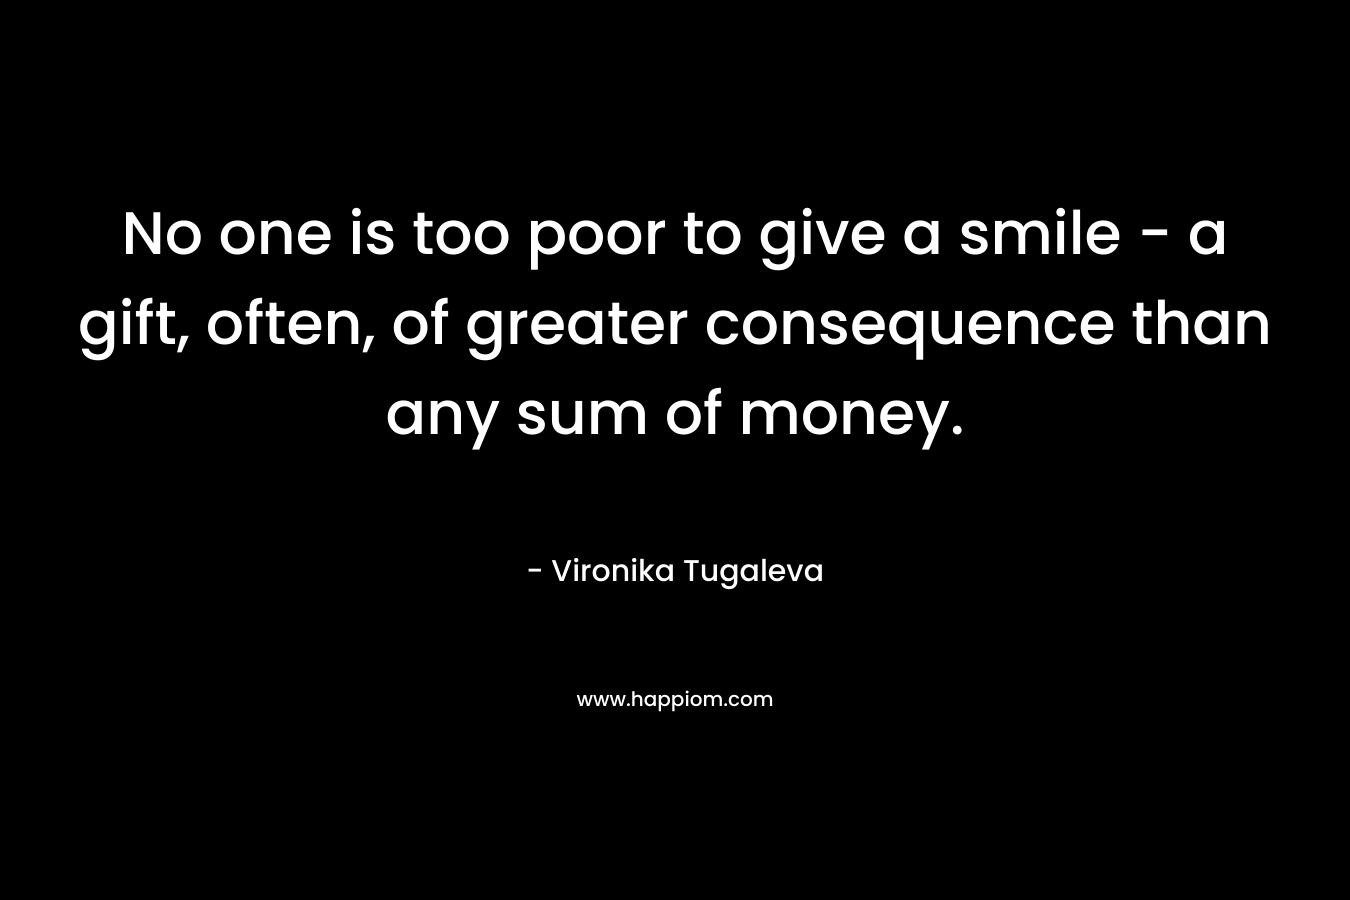 No one is too poor to give a smile - a gift, often, of greater consequence than any sum of money.